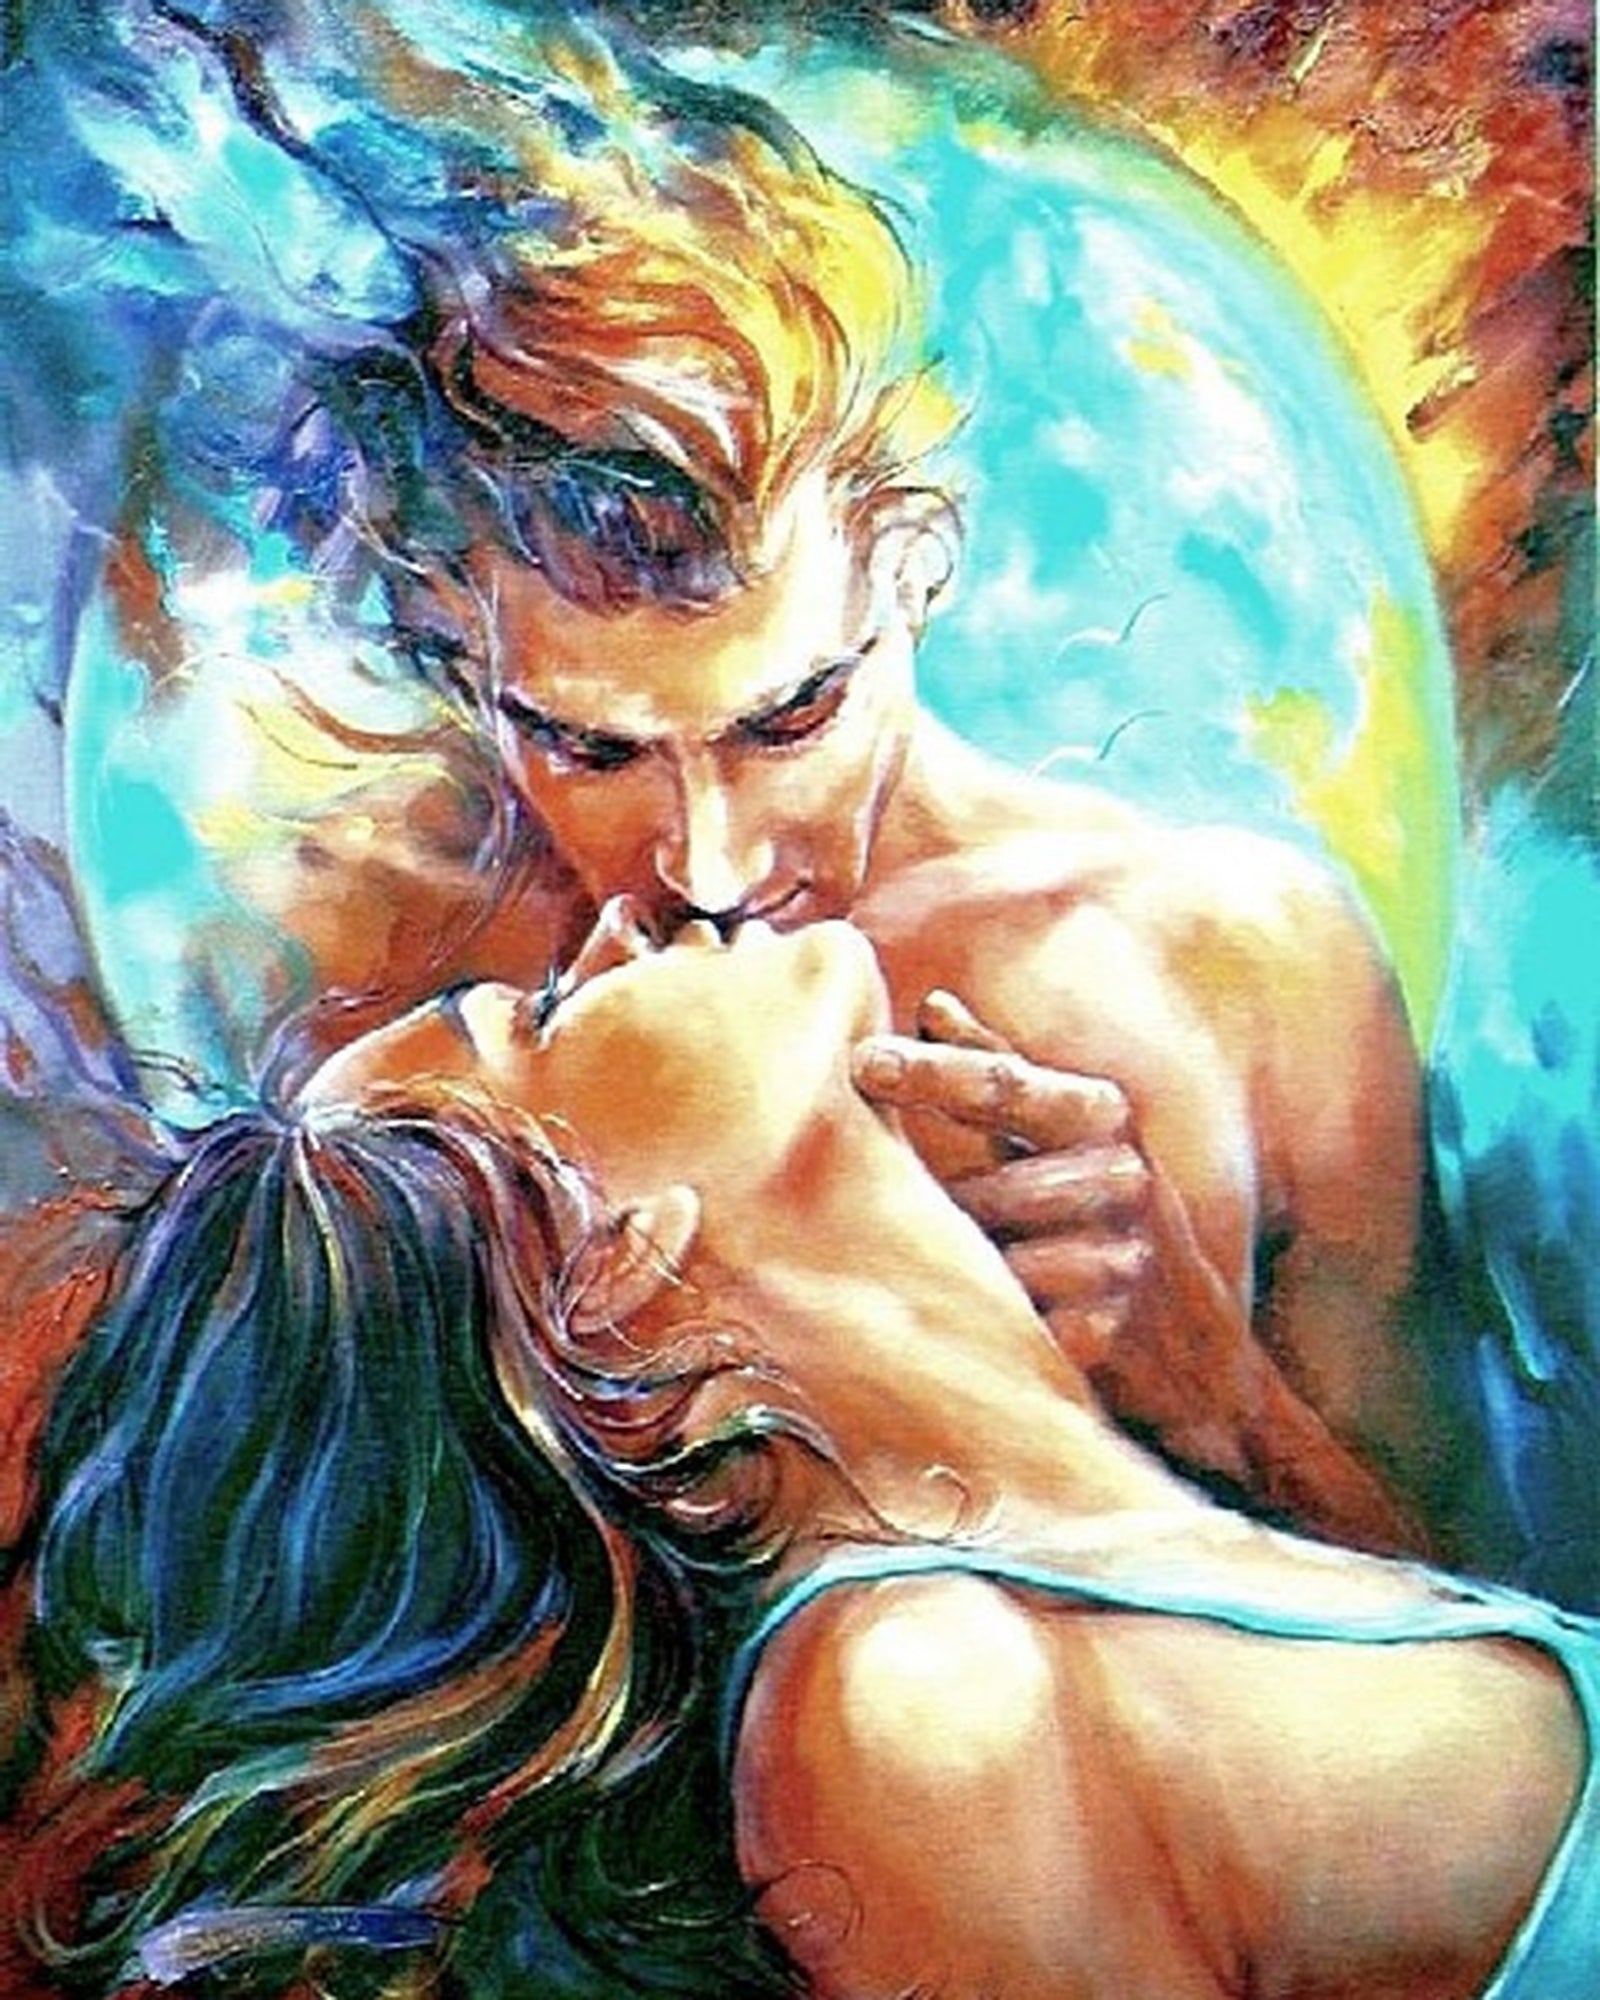 Paint By Numbers - Captivating Embrace: Intimate And Romantic Scene Of Passionate Love - Framed- 40x50cm - Arterium 